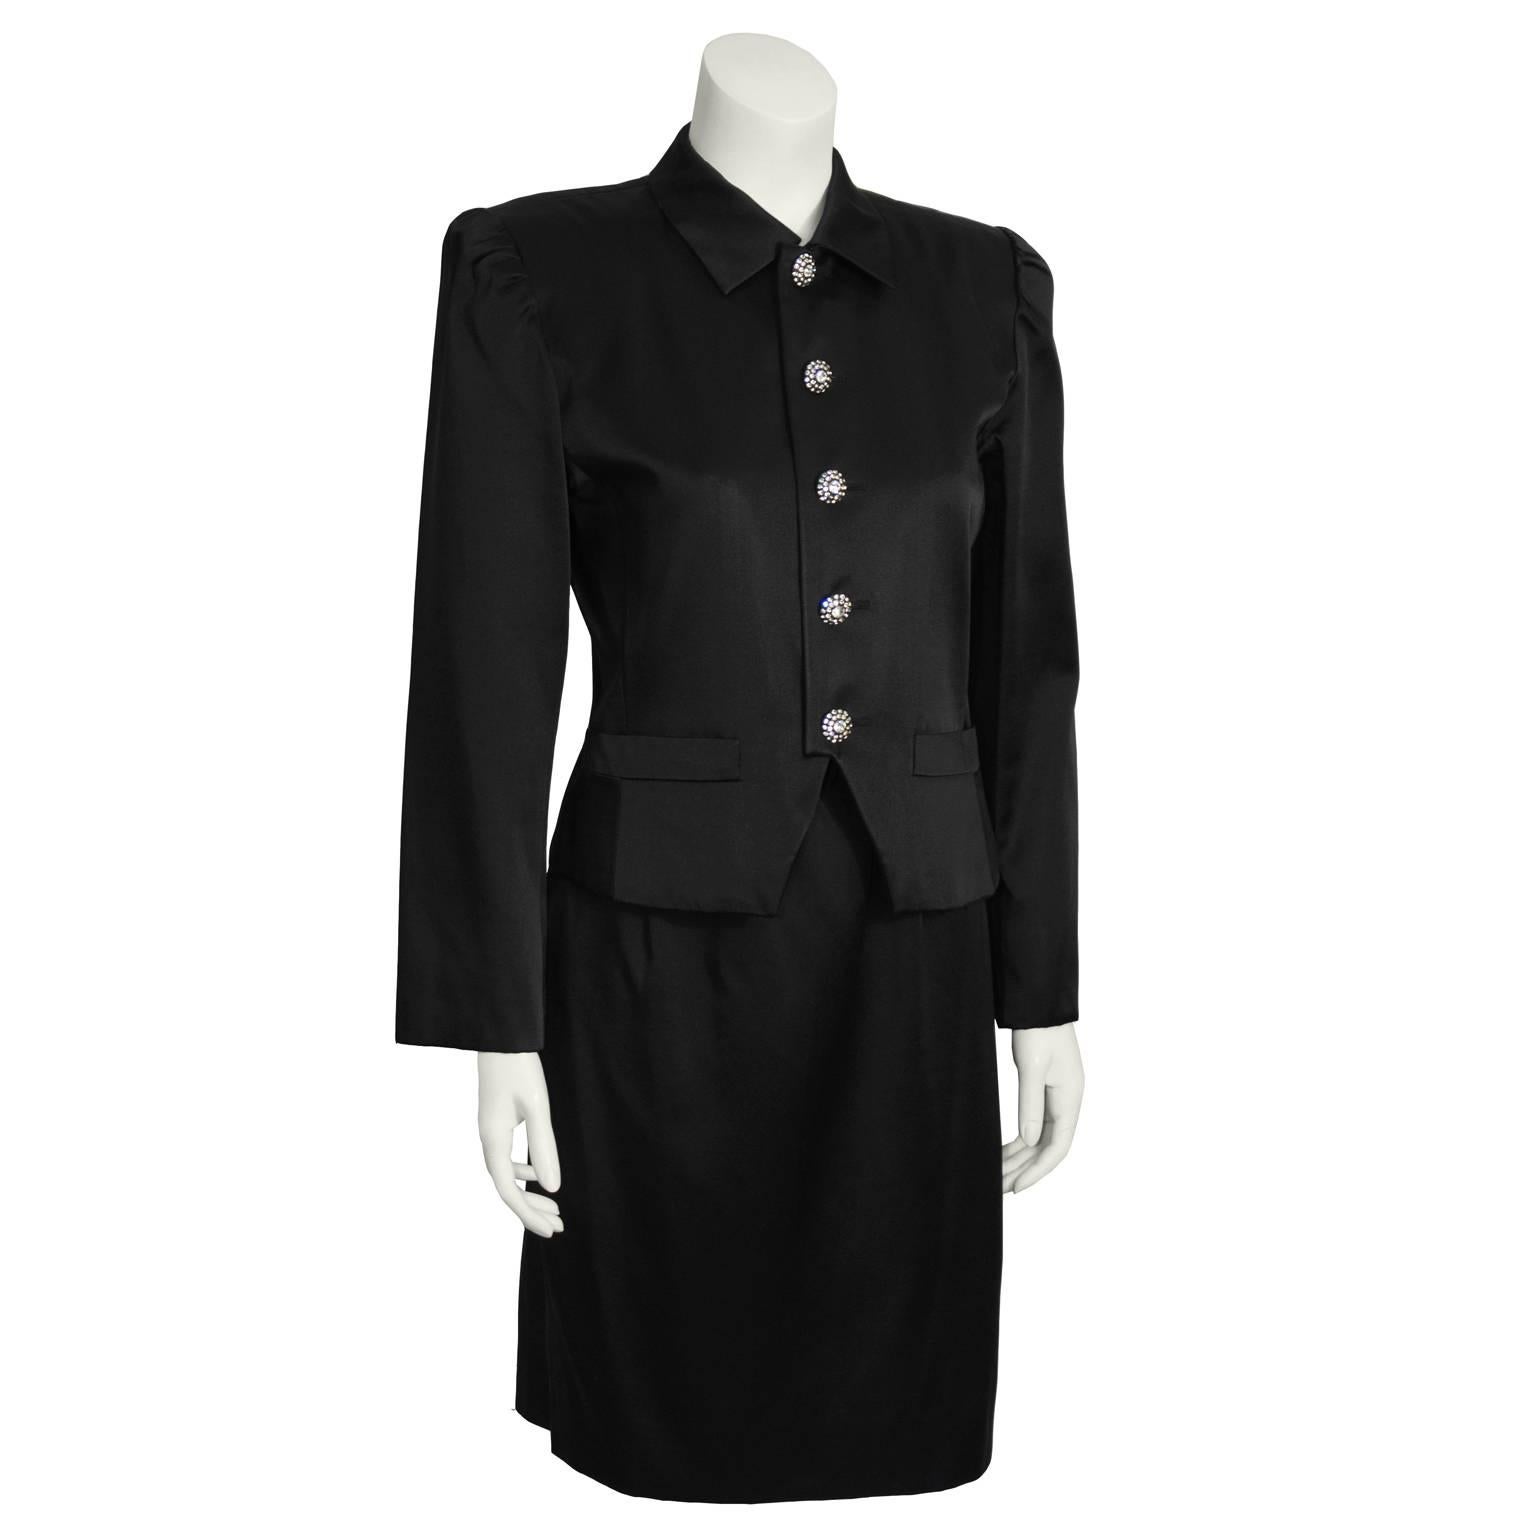 Gorgeous Yves Saint Laurent satin skirt suit from the 1980's. Jacket has slightly puffed shoulders with medium shoulder pads, nicely fitted through the waist. Two flap pockets at hips. Front button closure with eye-catching rhinestone buttons.